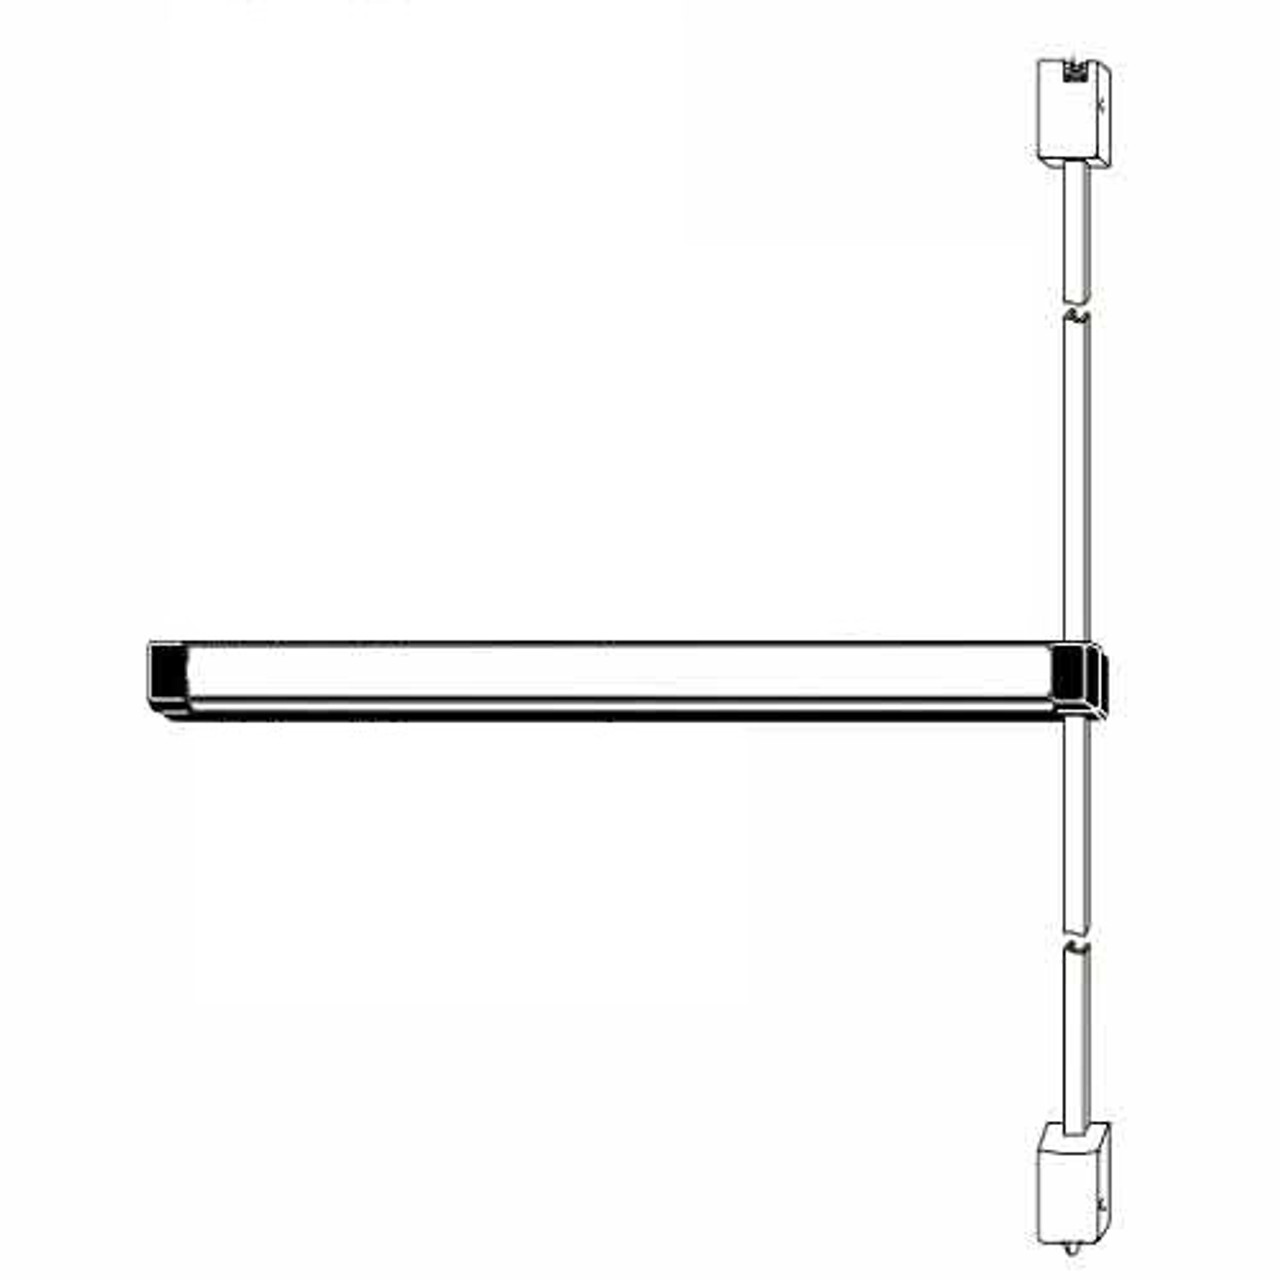 Adams Rite Fire-rated Concealed Vertical Rod Exit Device